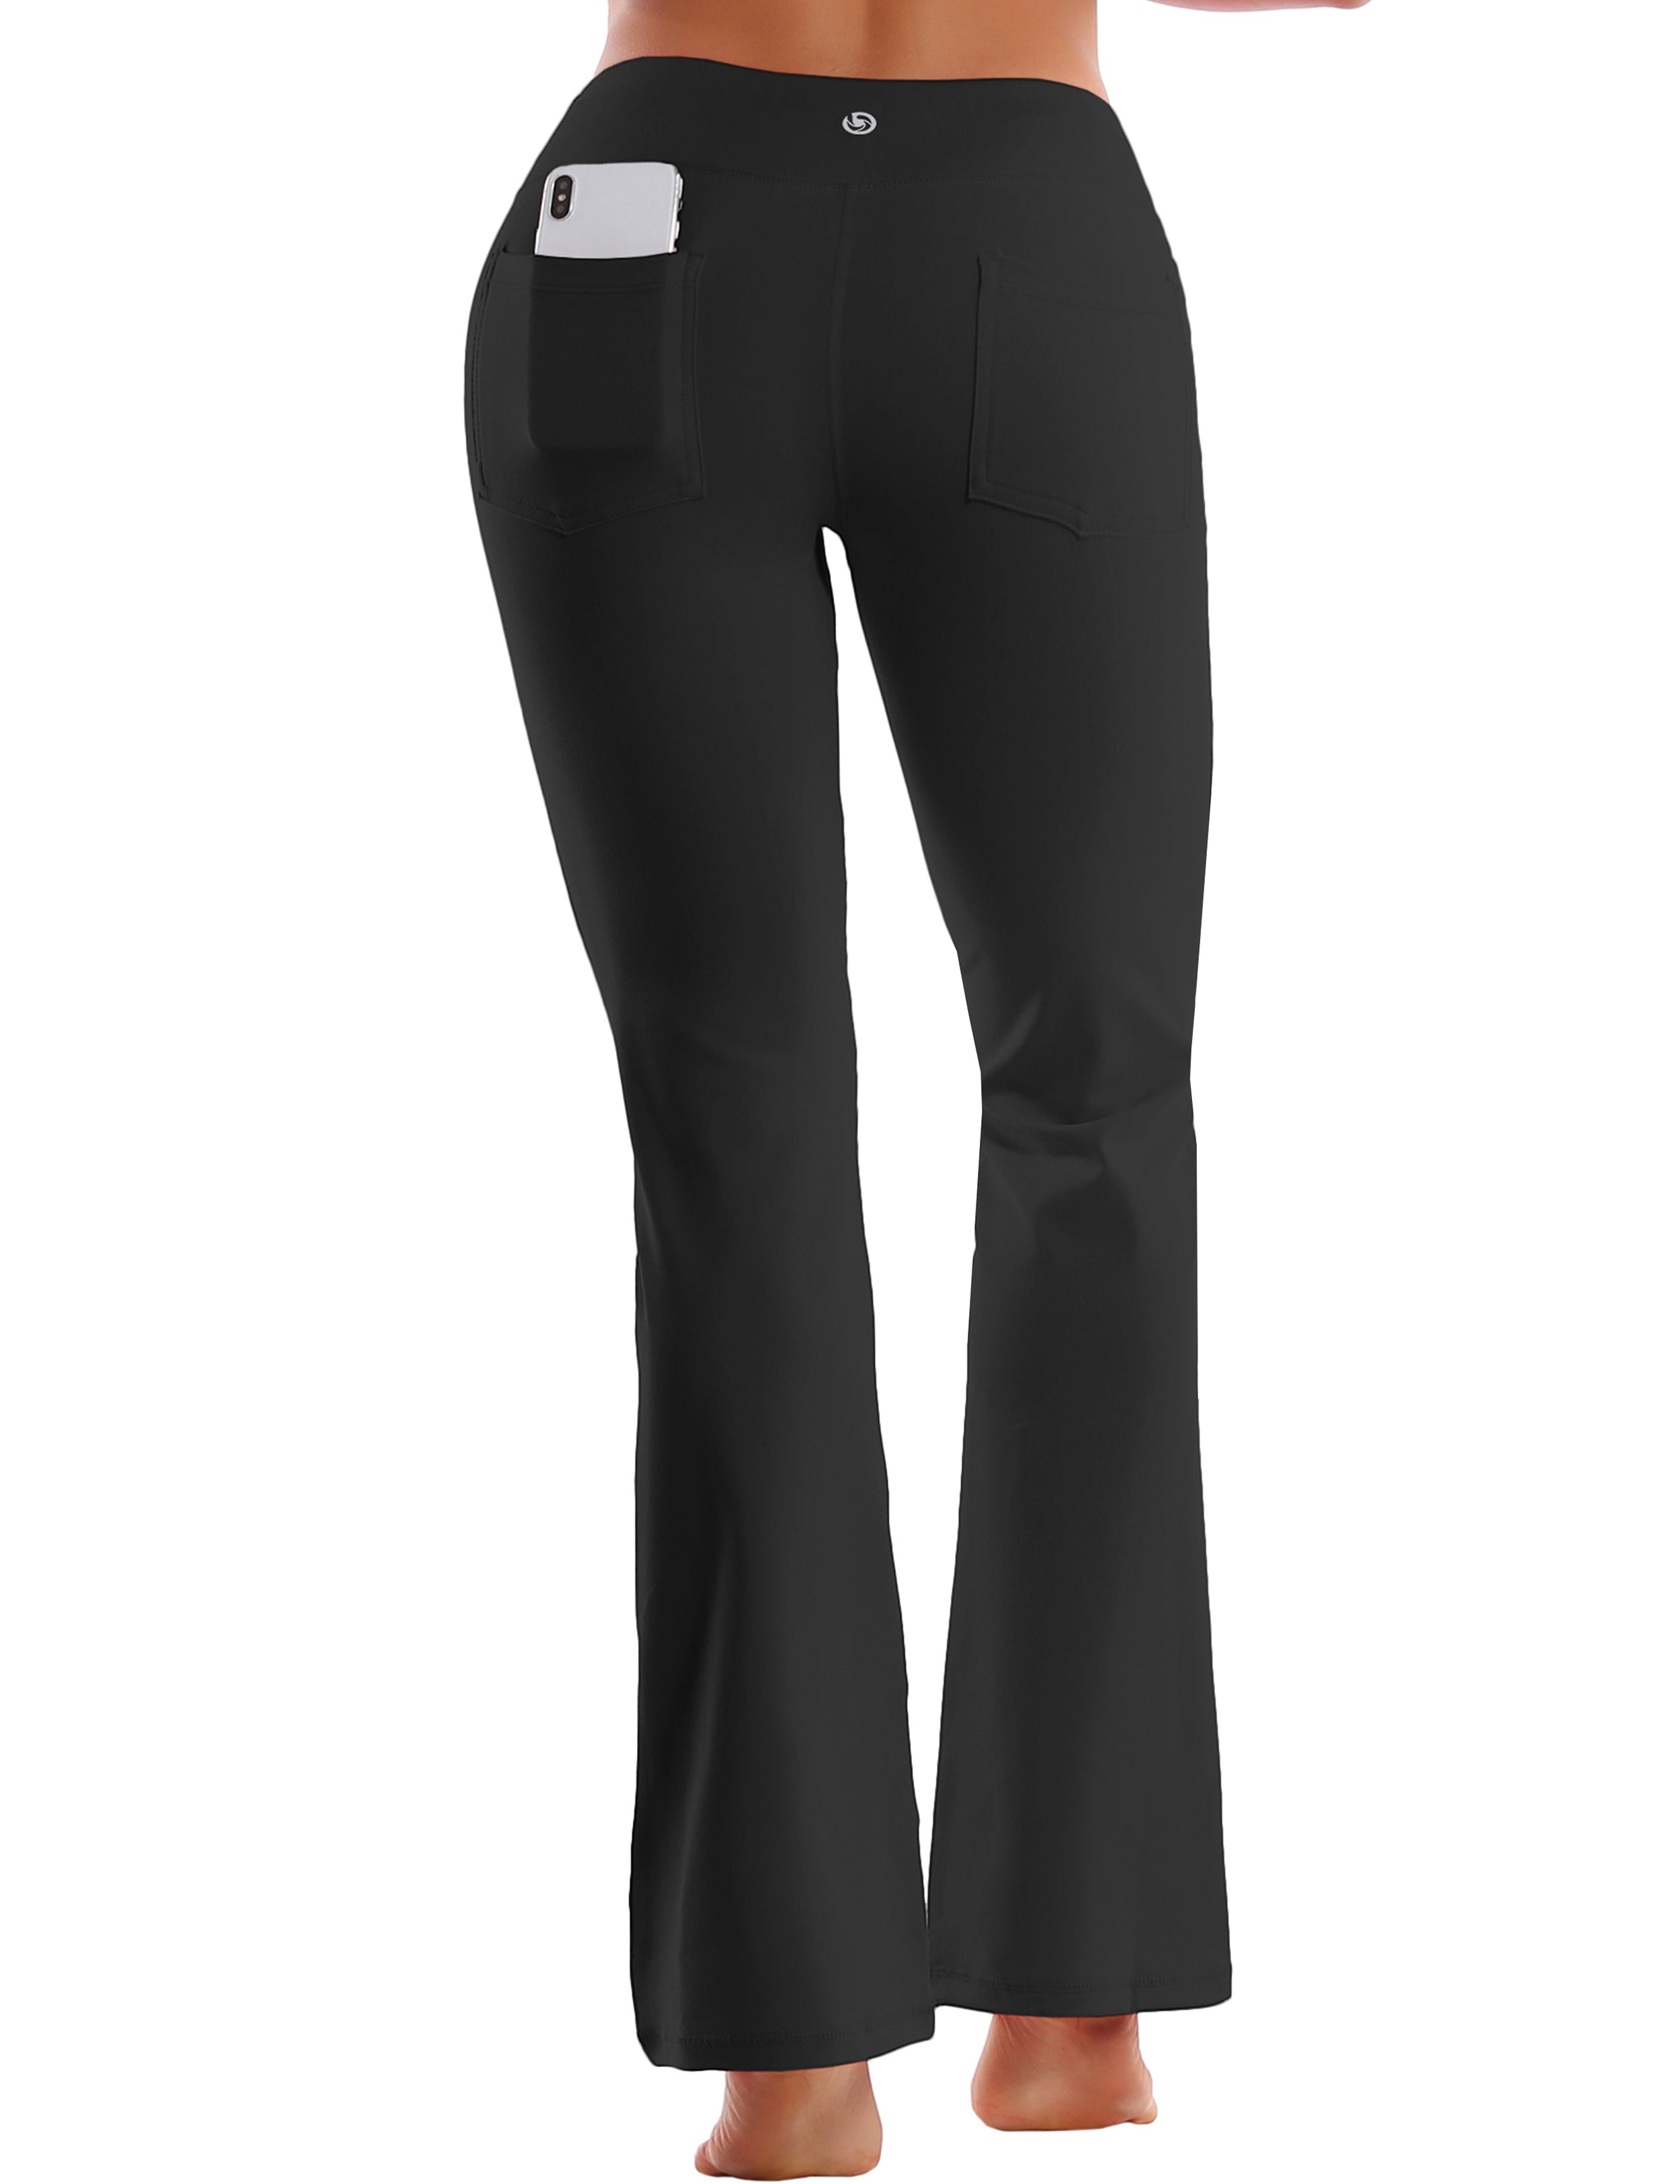 29 31 33 35 37 Flare Yoga Pants with Pockets – bubblelime